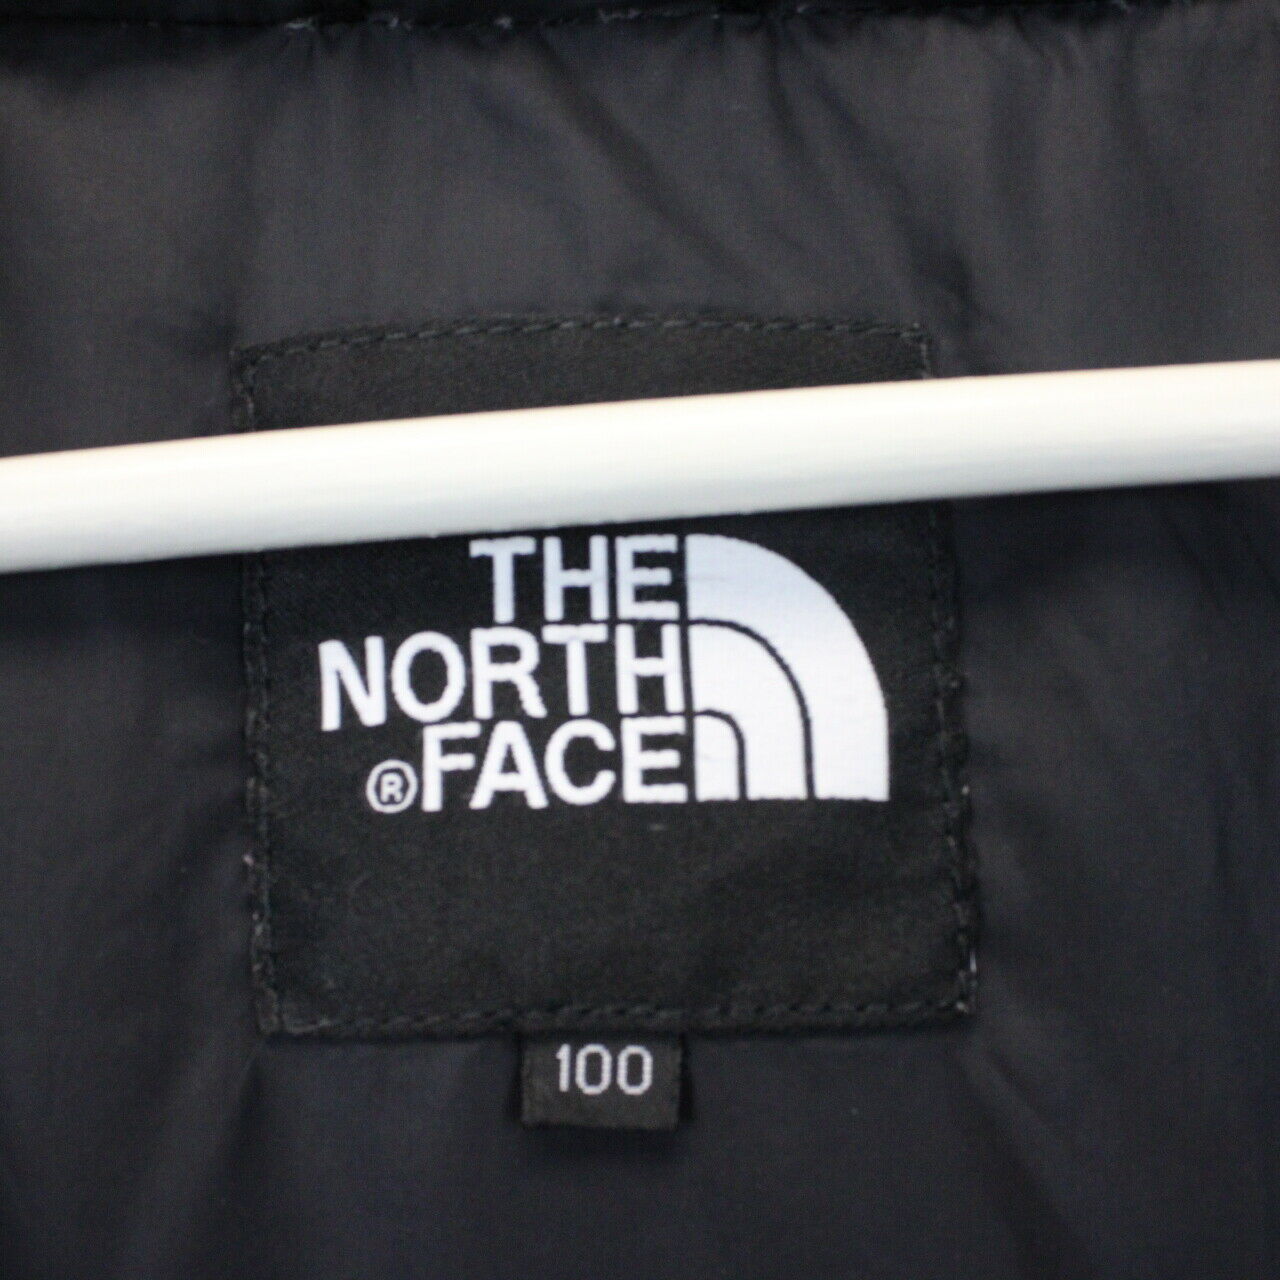 THE NORTH FACE Nuptse 700 Puffer Jacket Navy Blue | Large